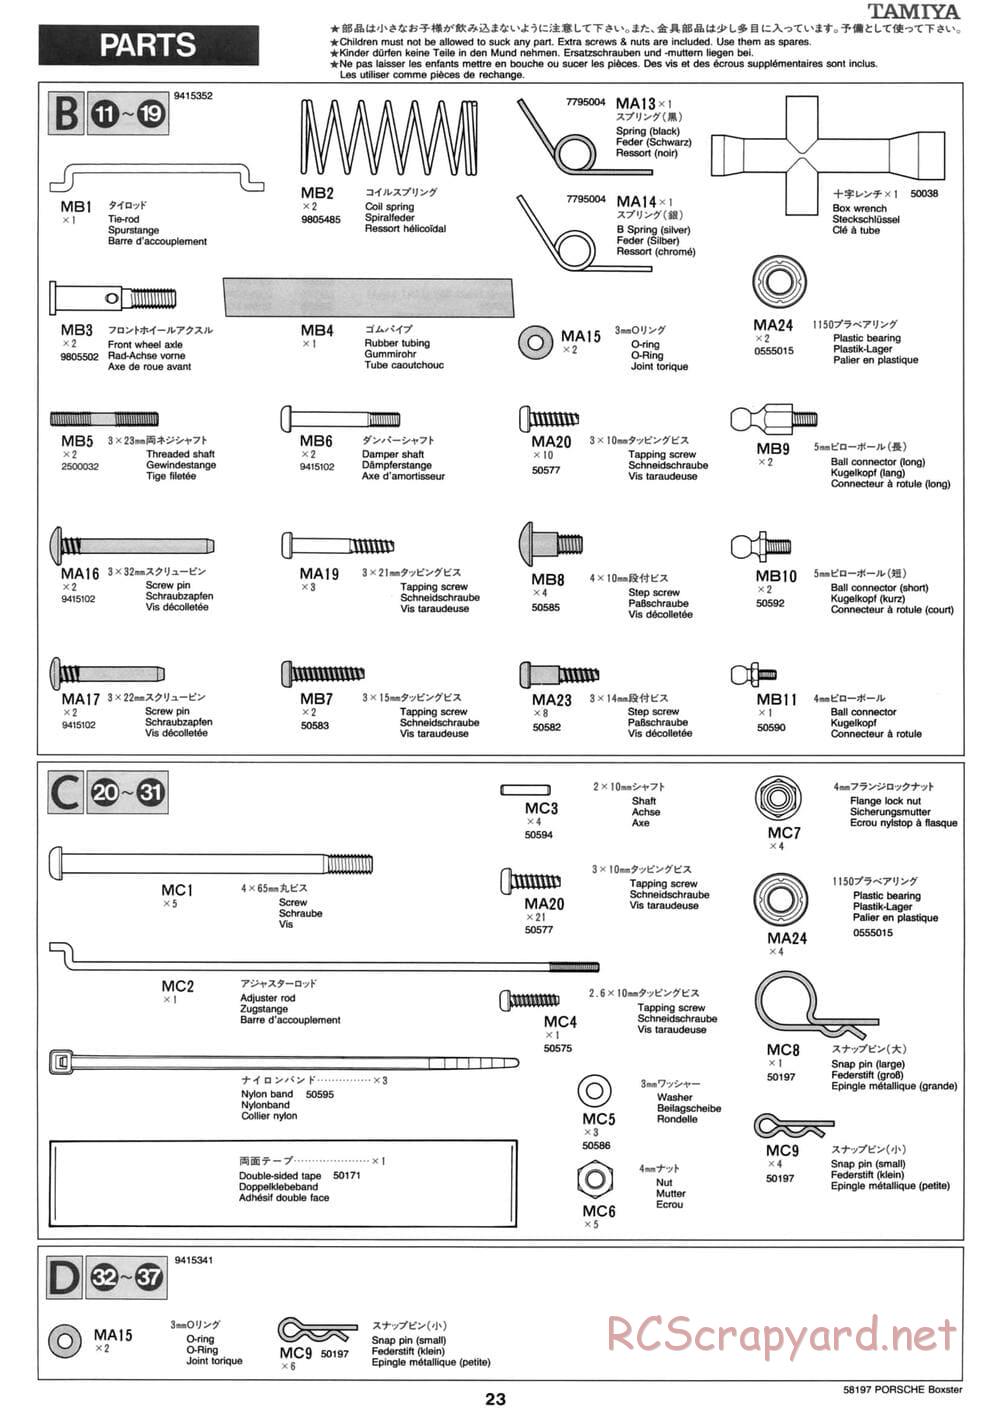 Tamiya - Porsche Boxster - M02L Chassis - Manual - Page 23